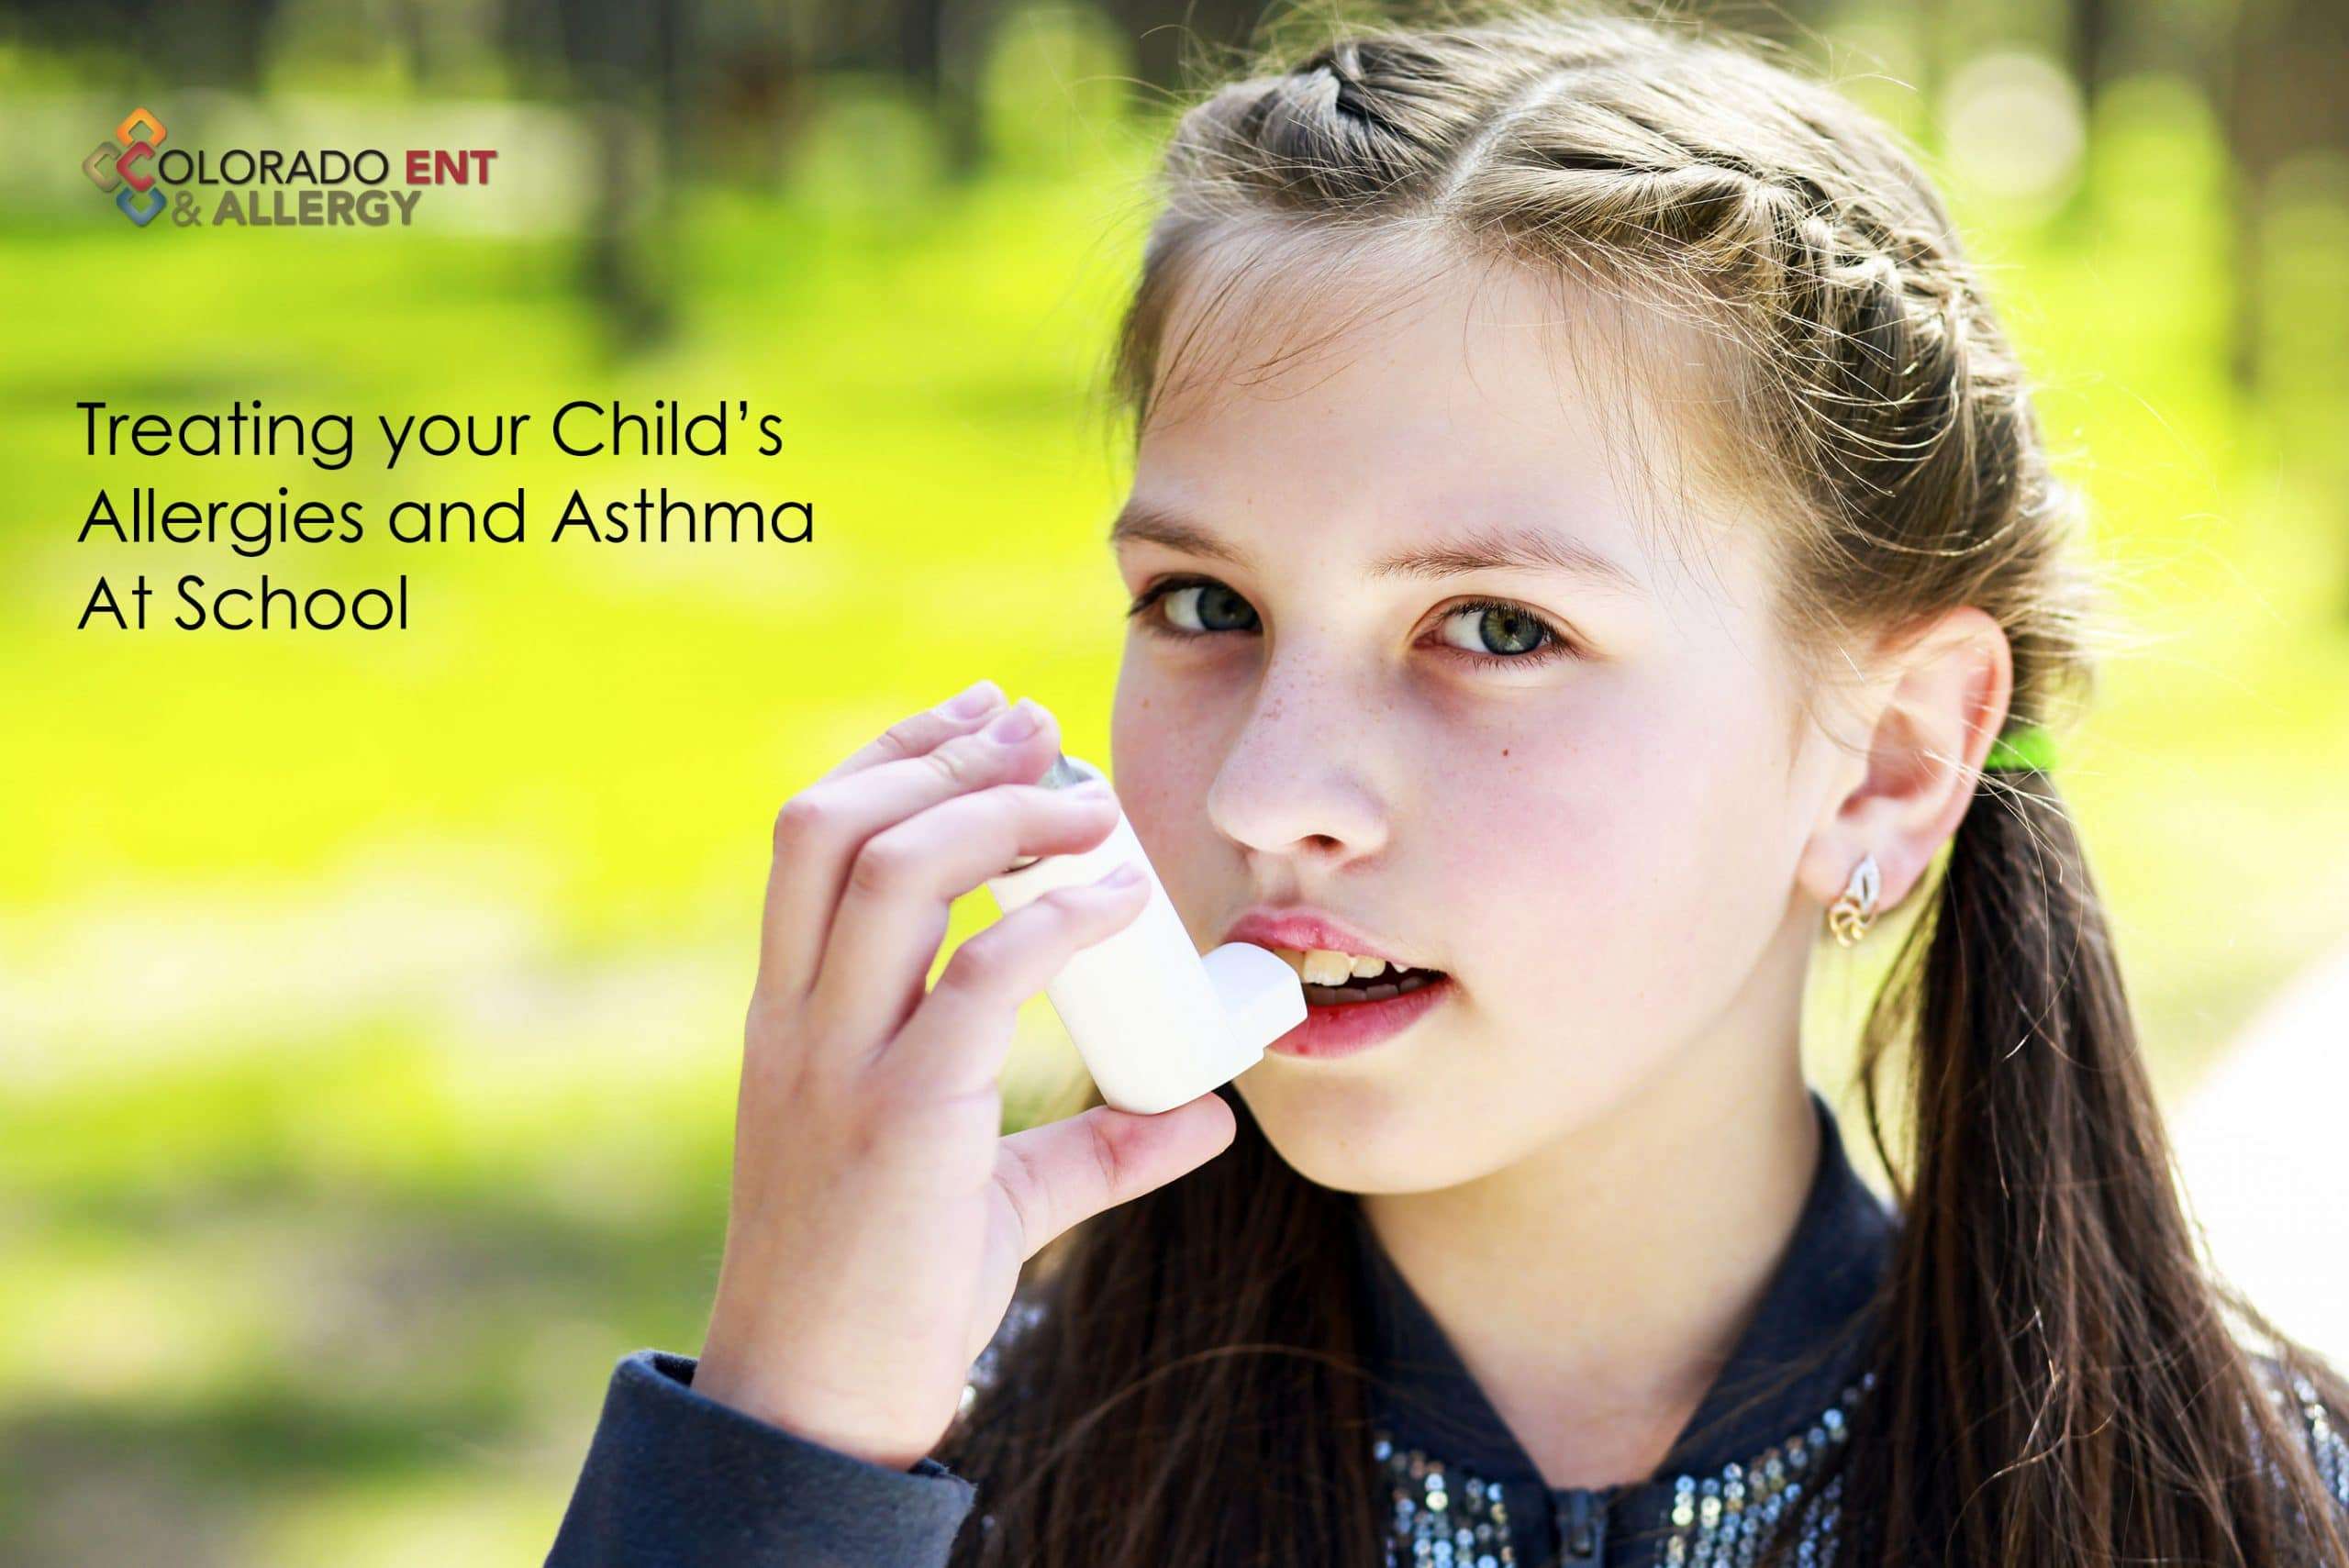 Treating Your Childâs Allergies and Asthma at School